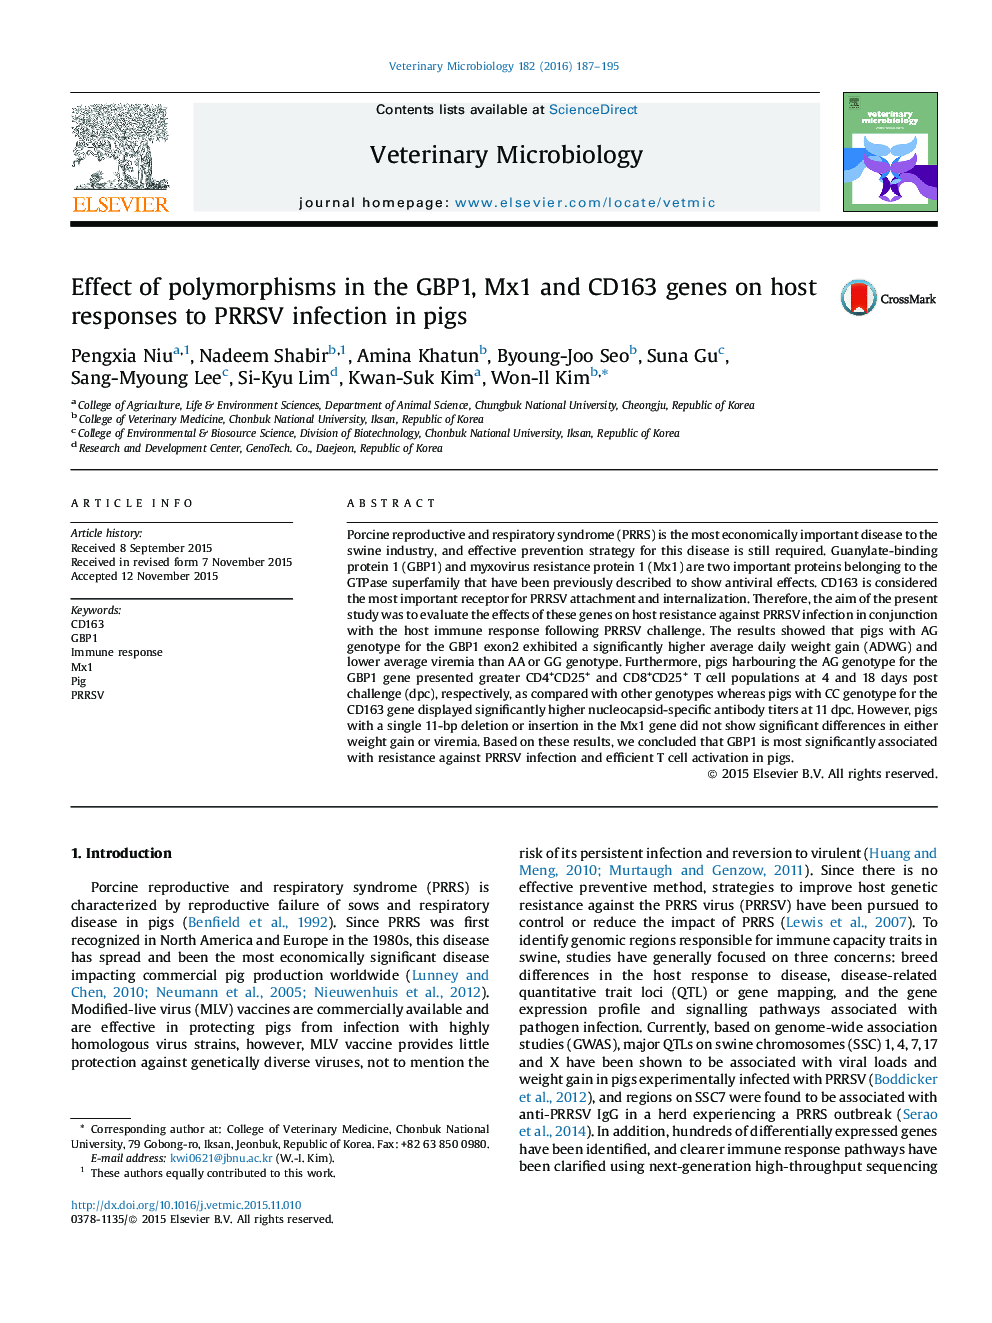 Effect of polymorphisms in the GBP1, Mx1 and CD163 genes on host responses to PRRSV infection in pigs